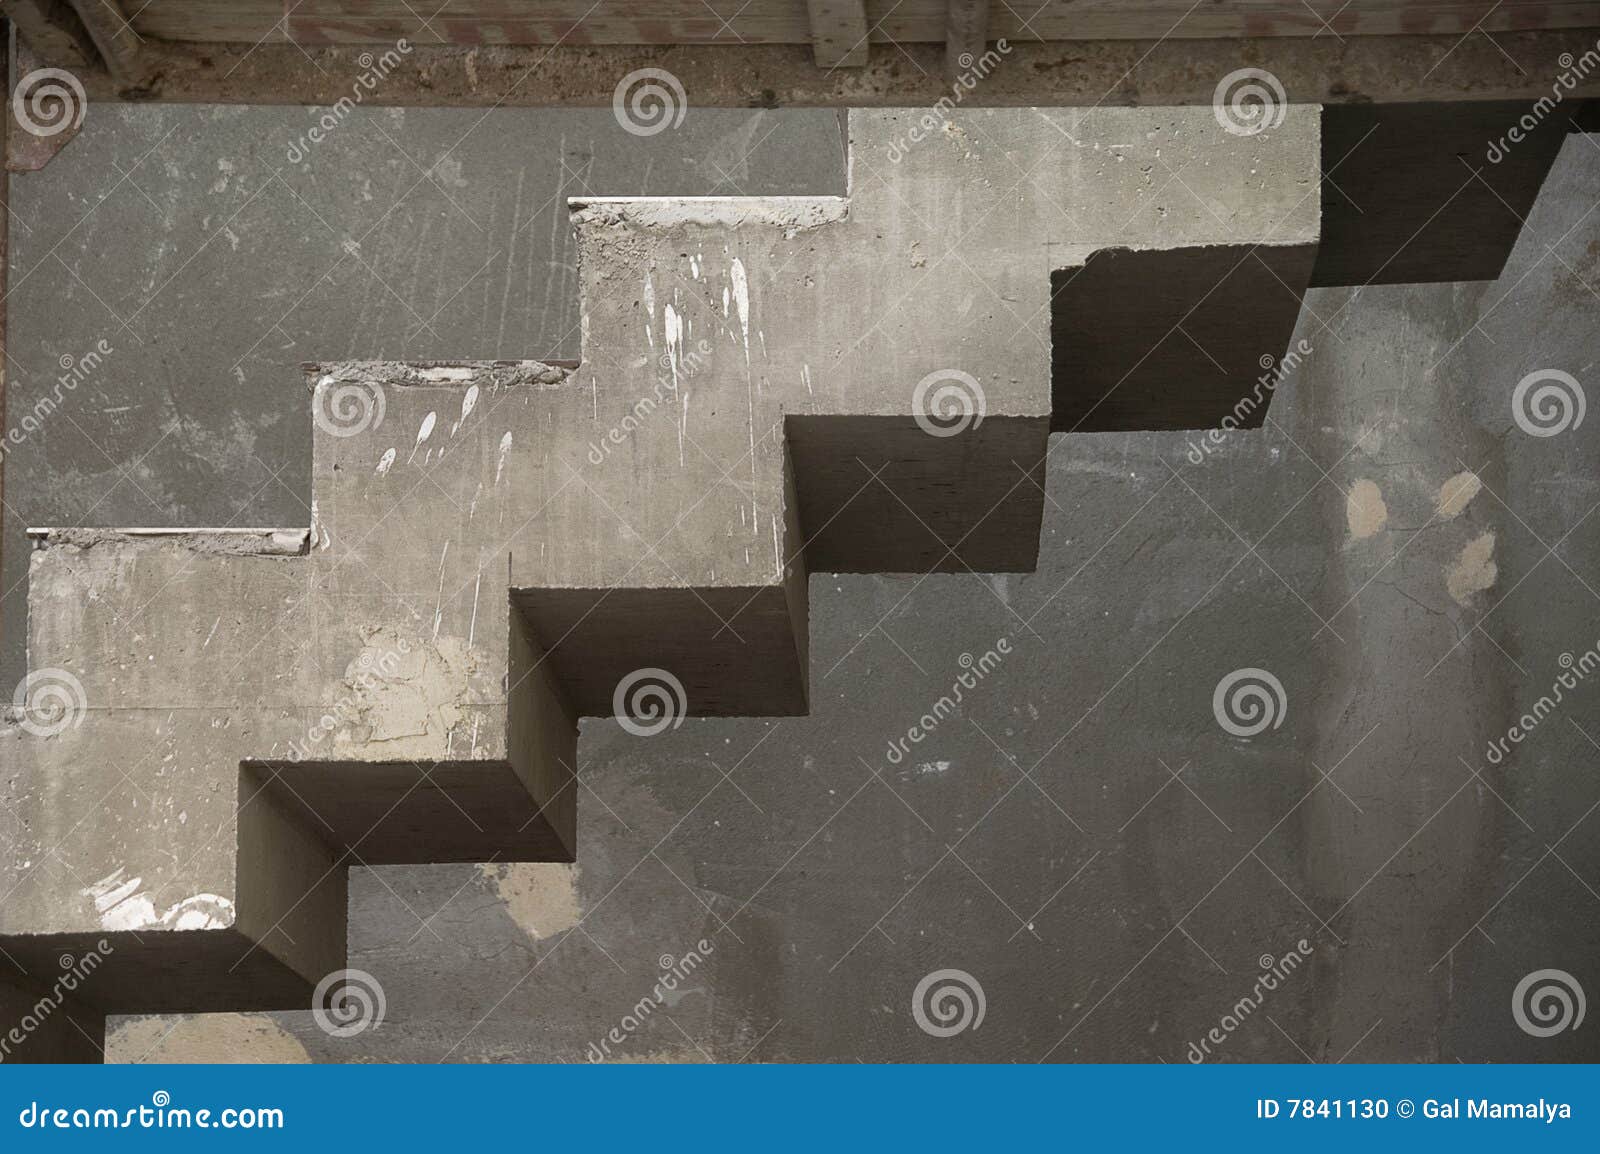 unfinished concrete stairs